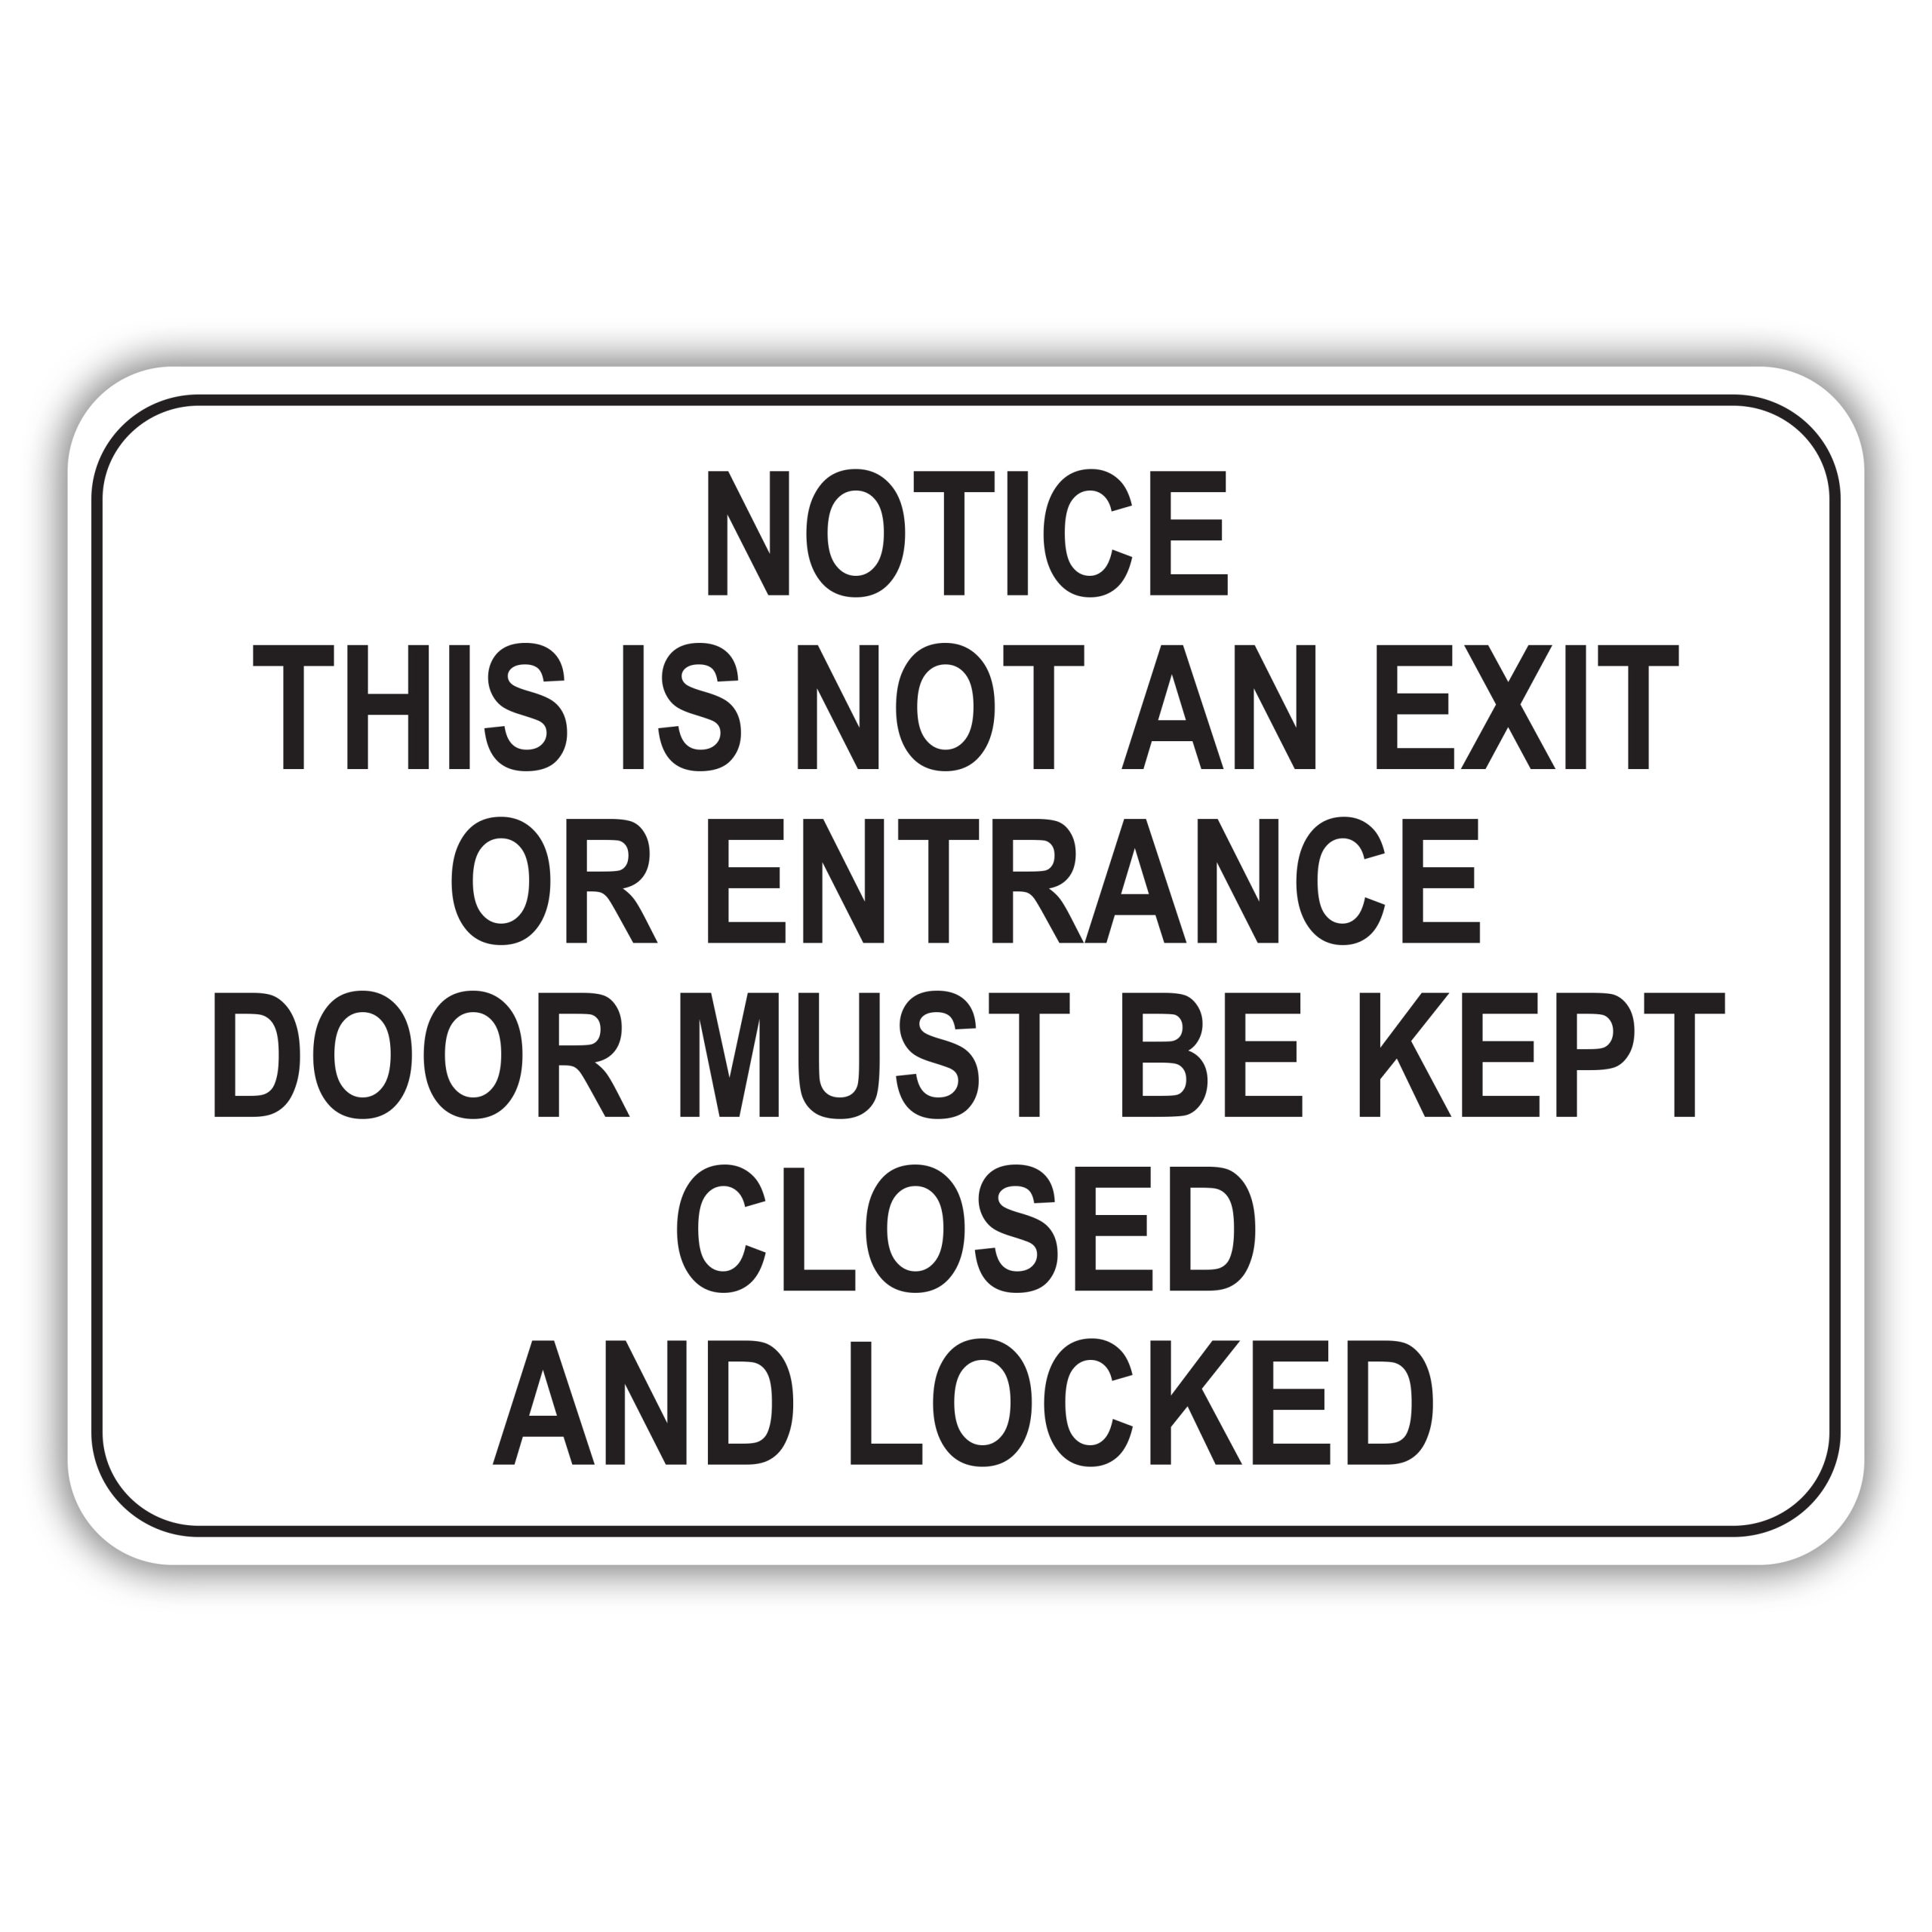 notice-this-is-not-an-exit-or-entrance-door-must-be-kept-closed-and